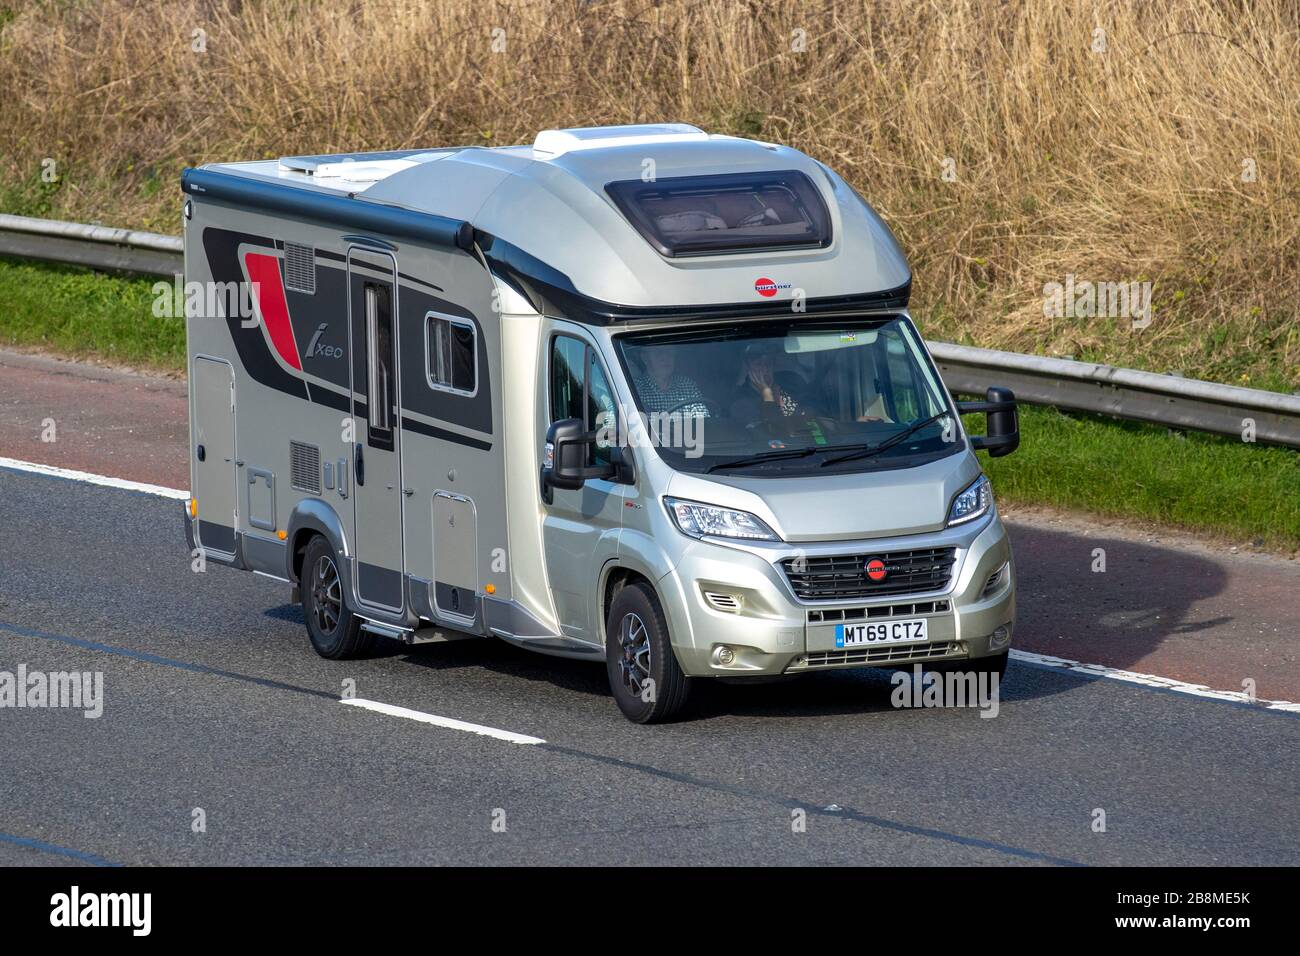 2019 Fiat Ducato Touring Caravans and Motorhomes, campervans, RV leisure  vehicle, family holidays, vacations, caravan holiday, life on the road:  Tavelling on the M6 motorway, UK Stock Photo - Alamy